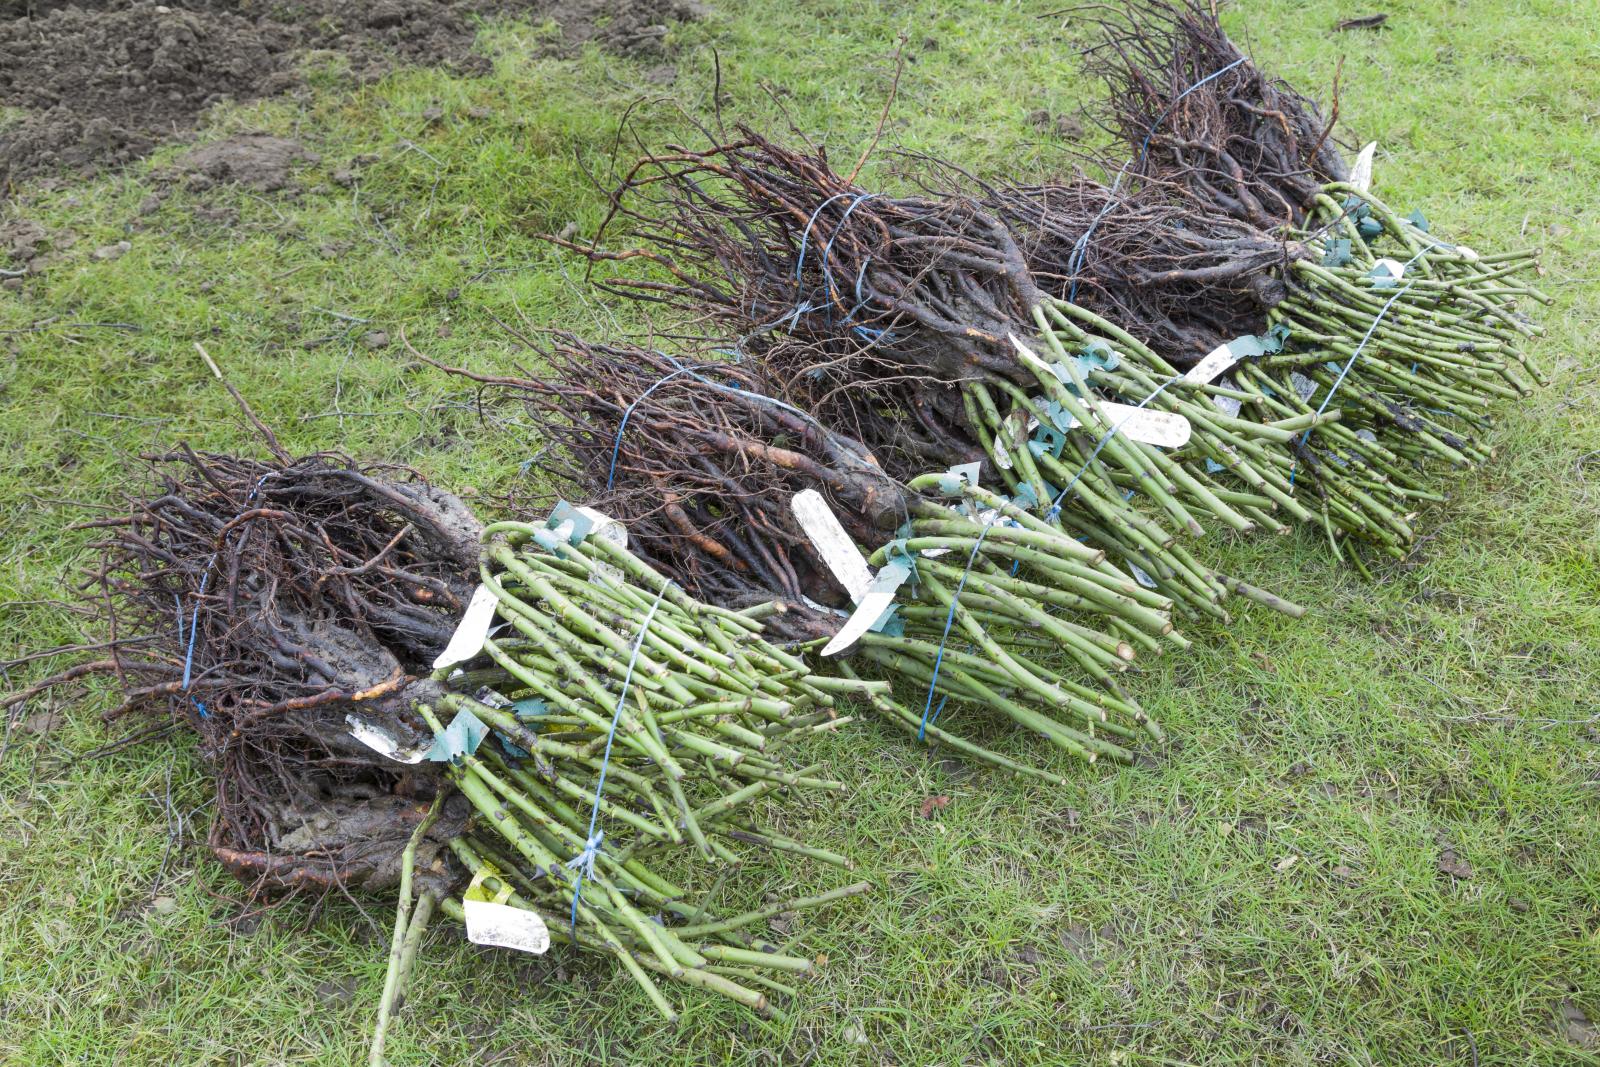 Planting bare-root rose plants